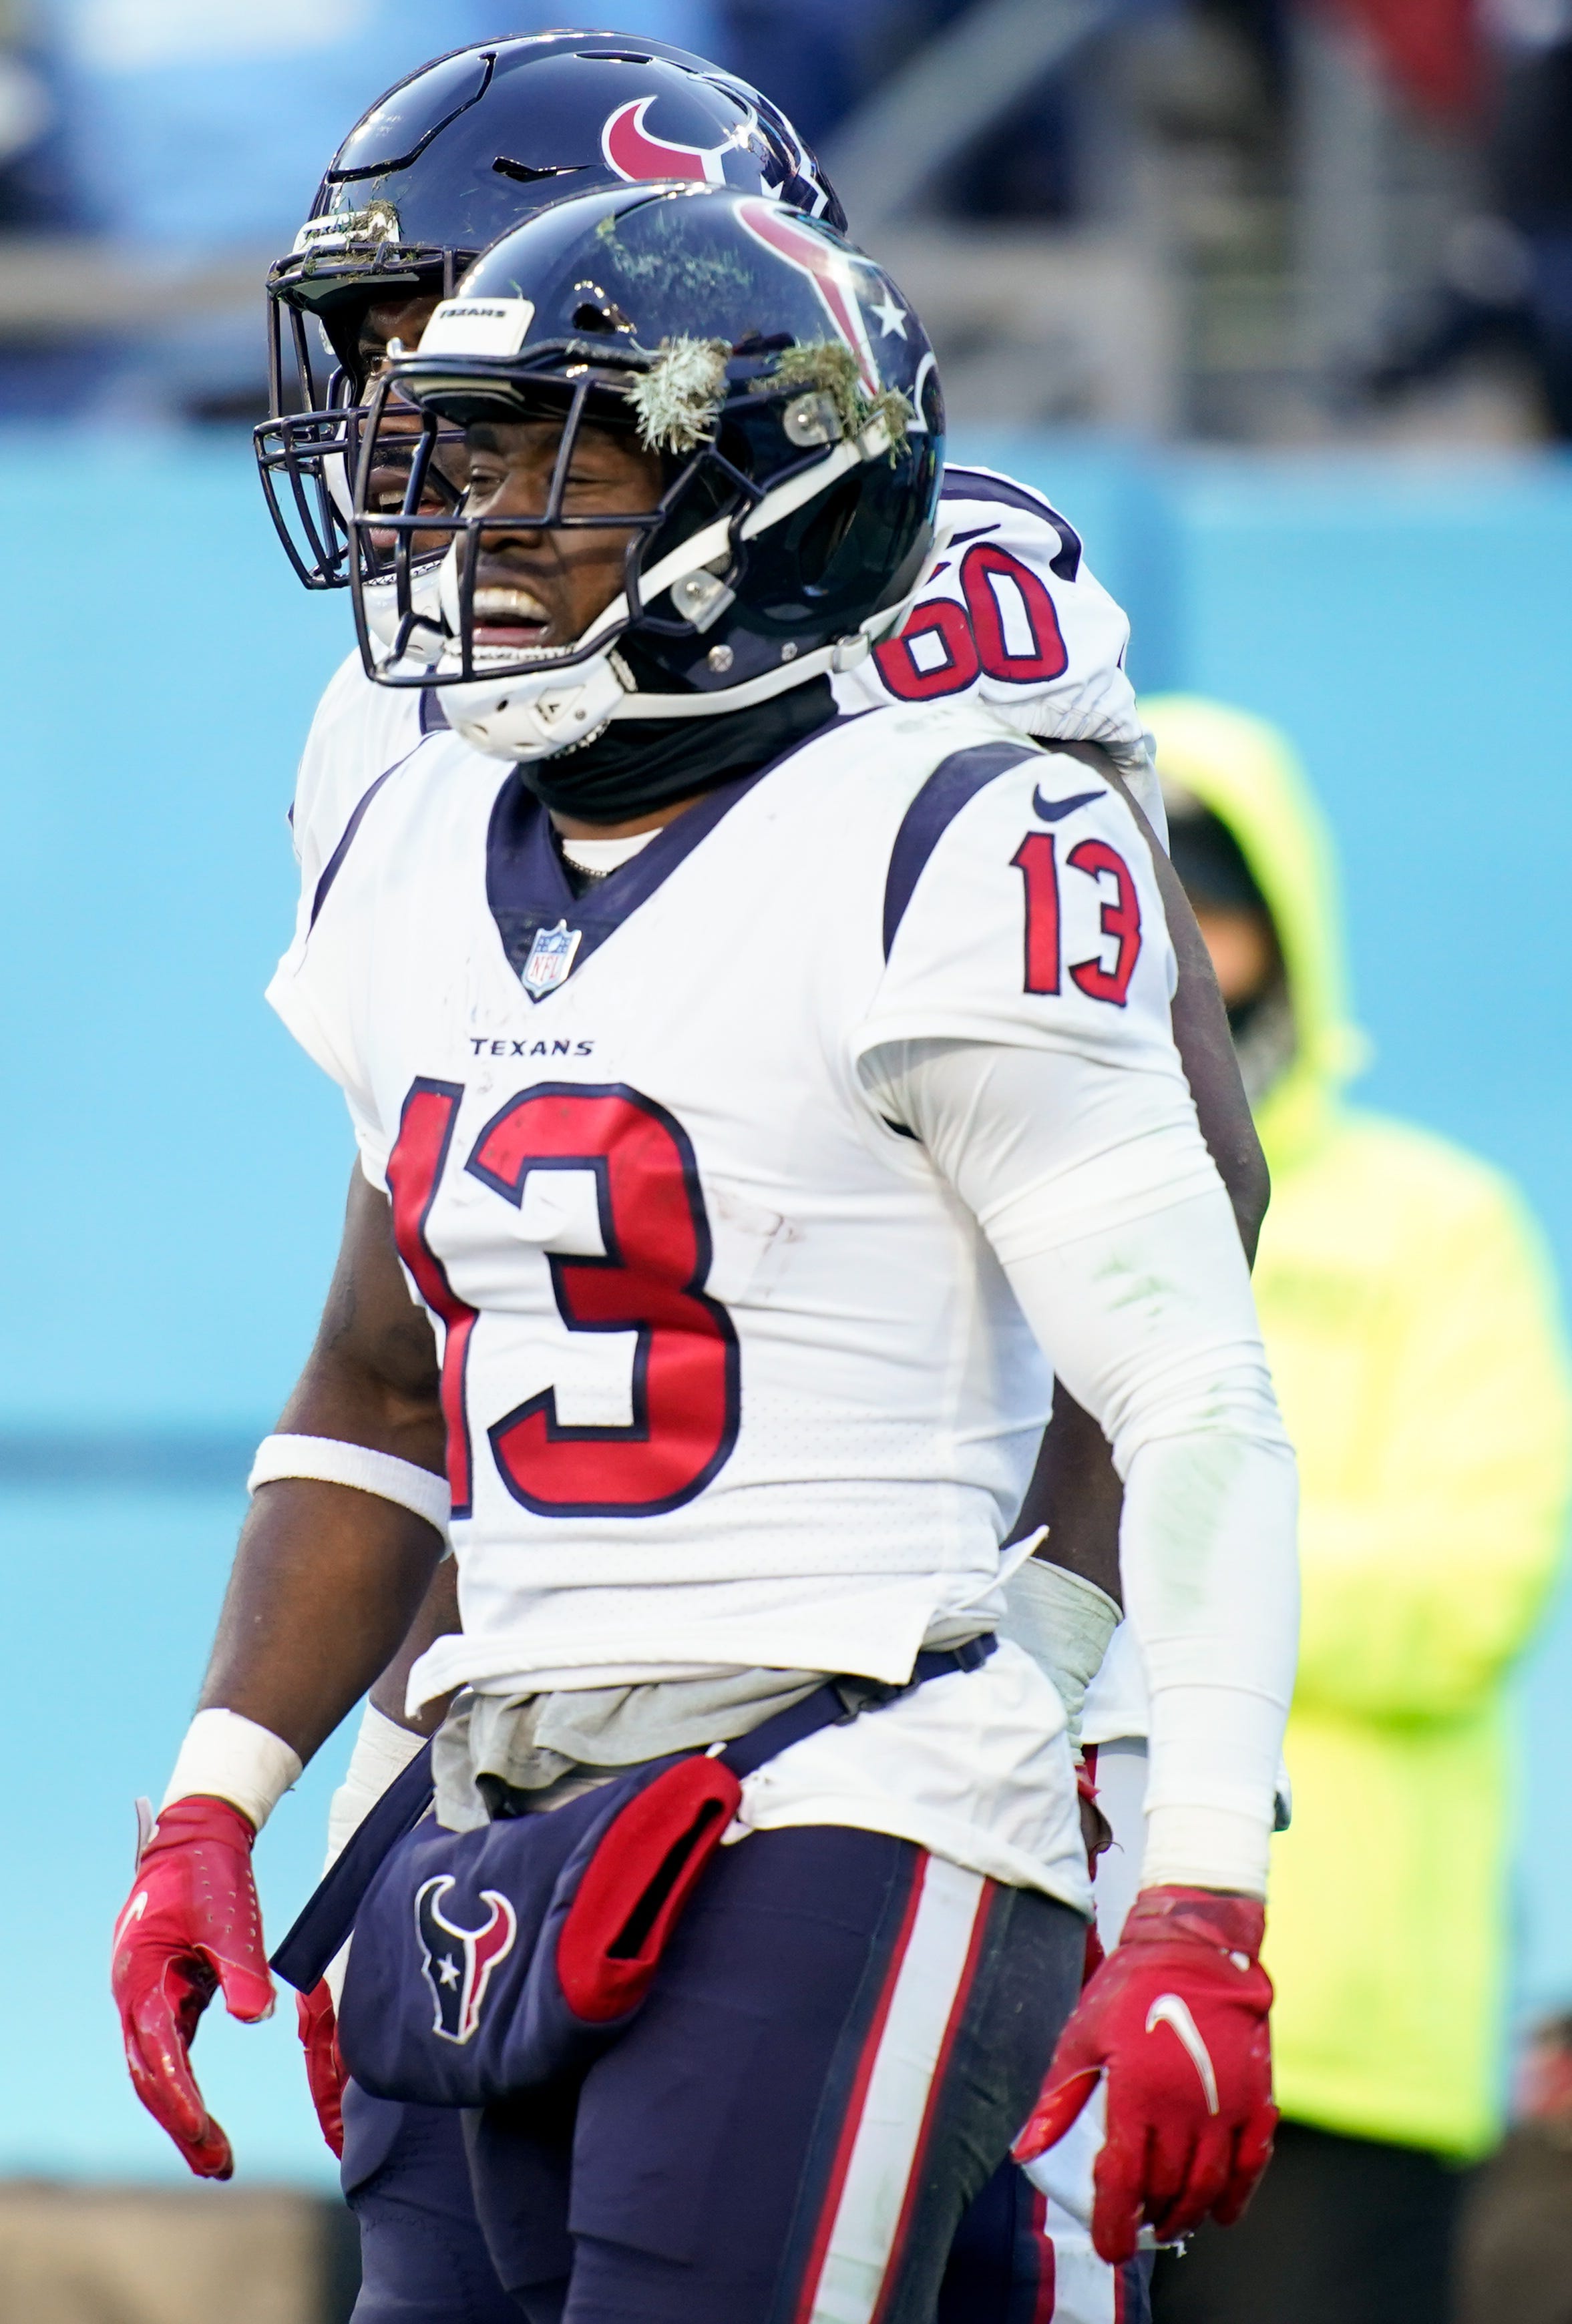 Houston Texans wide receiver Brandin Cooks (13) is all smiles after scoring a touchdown during the fourth quarter at Nissan Stadium in Nashville, Tenn., Saturday, Dec. 24, 2022.